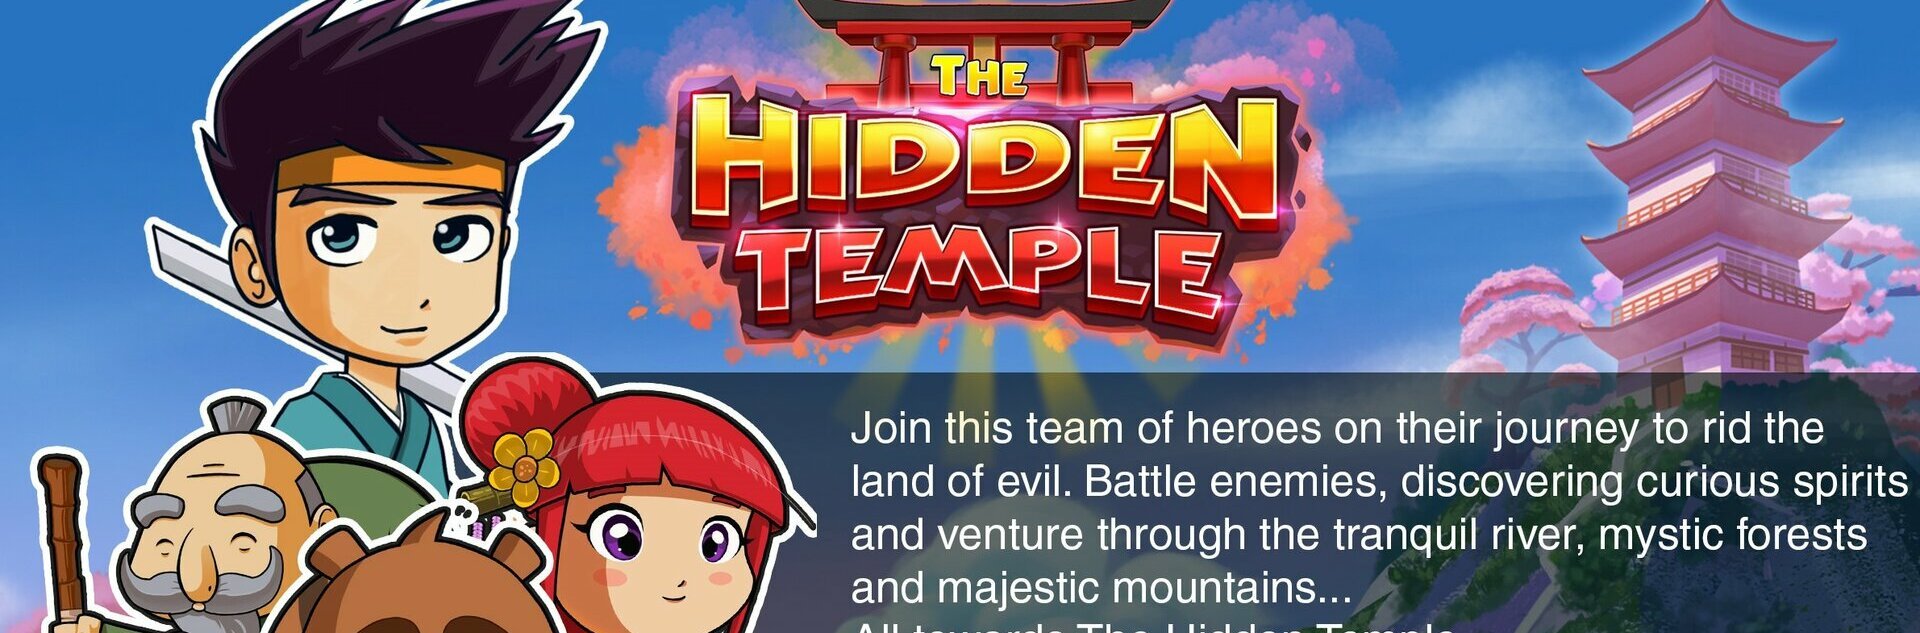 Play The Hidden Temple Free Slot